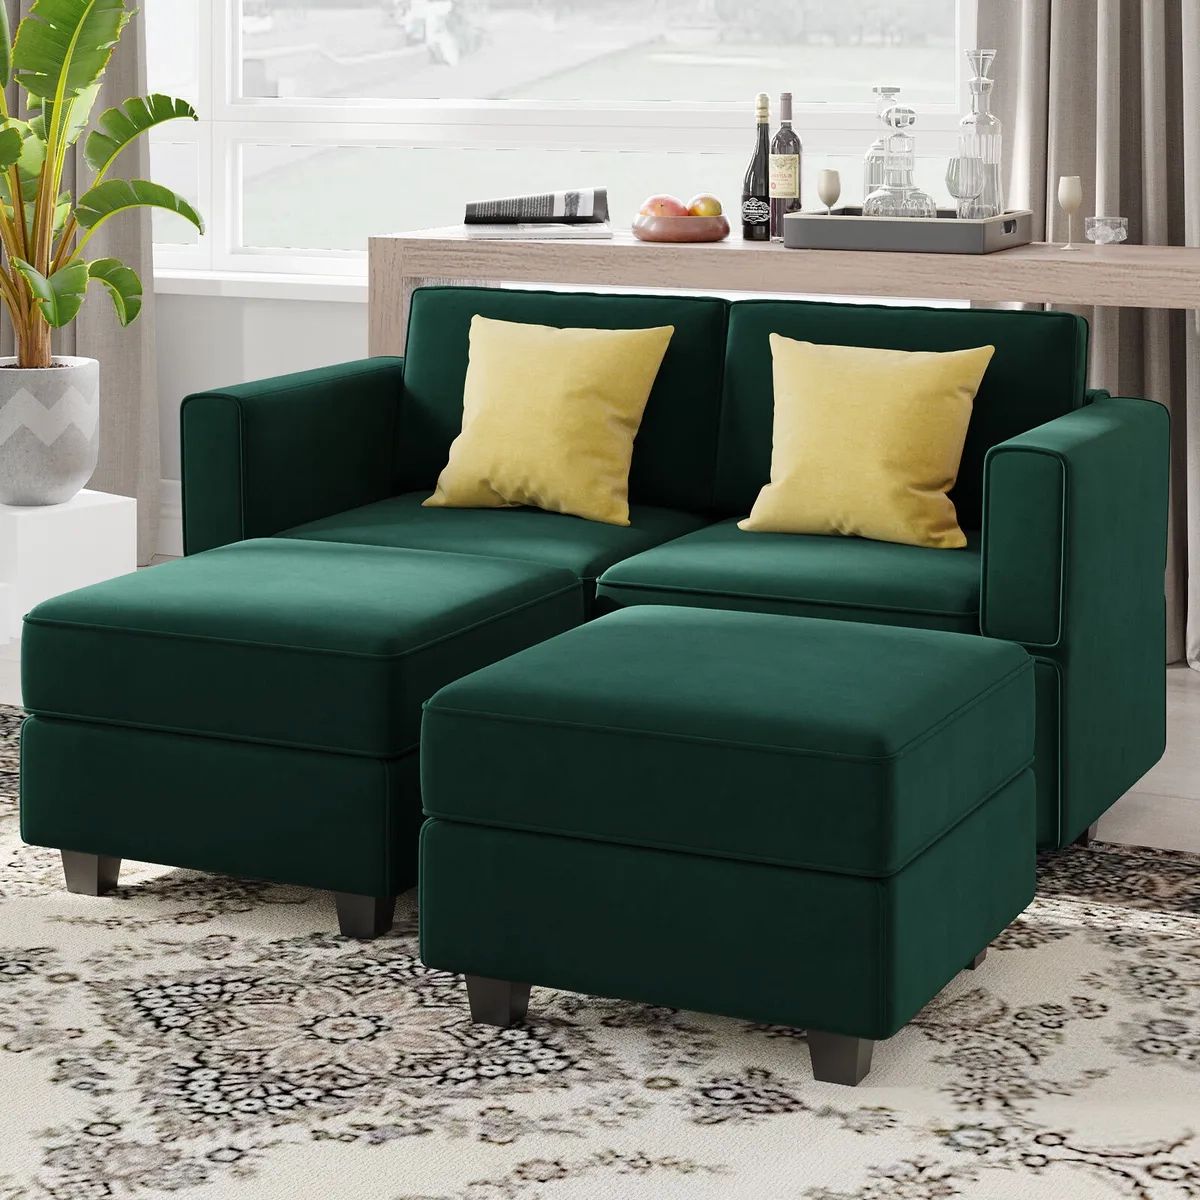 Belffin Modular Sectional Sofa With Storage Oversized Couch Bed Velvet Green  | Ebay Pertaining To Green Velvet Modular Sectionals (View 10 of 15)